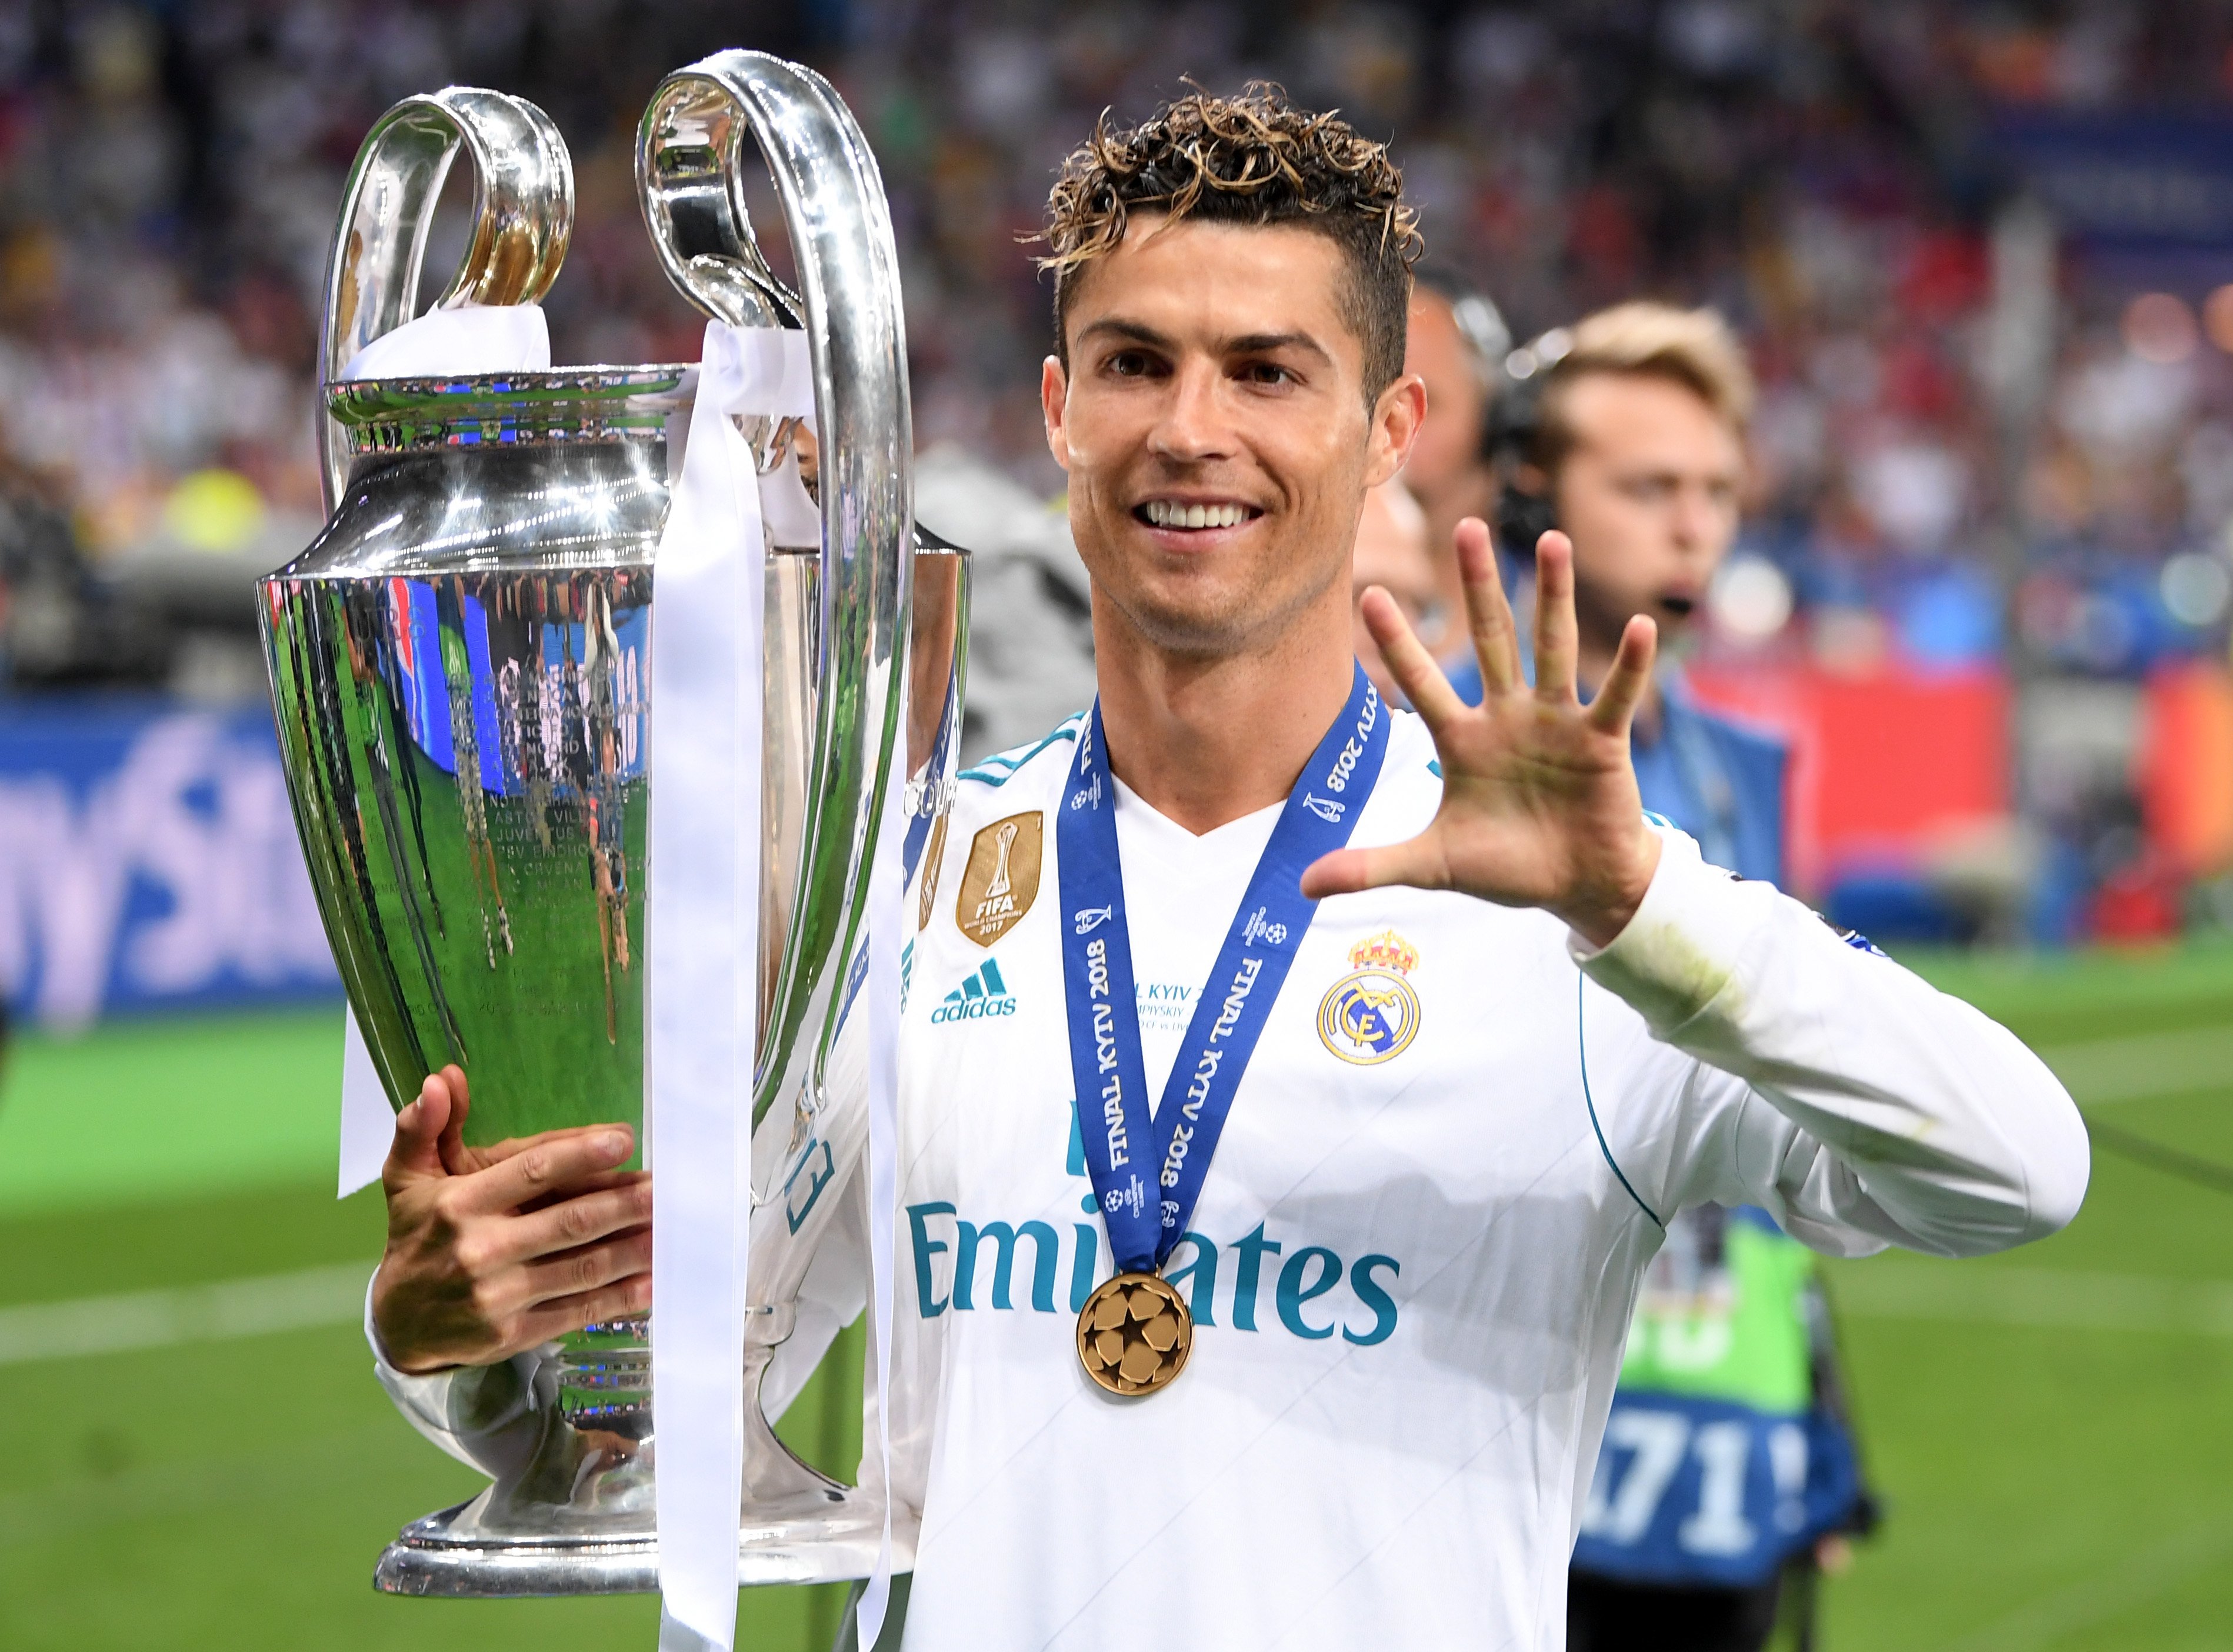 OptaPaolo 🏆 on Twitter: "120 - Cristiano Ronaldo is the all-time  top-scorer in the Champions League (120 goals). Reality.  https://t.co/SZZ3Oksy0c" / Twitter